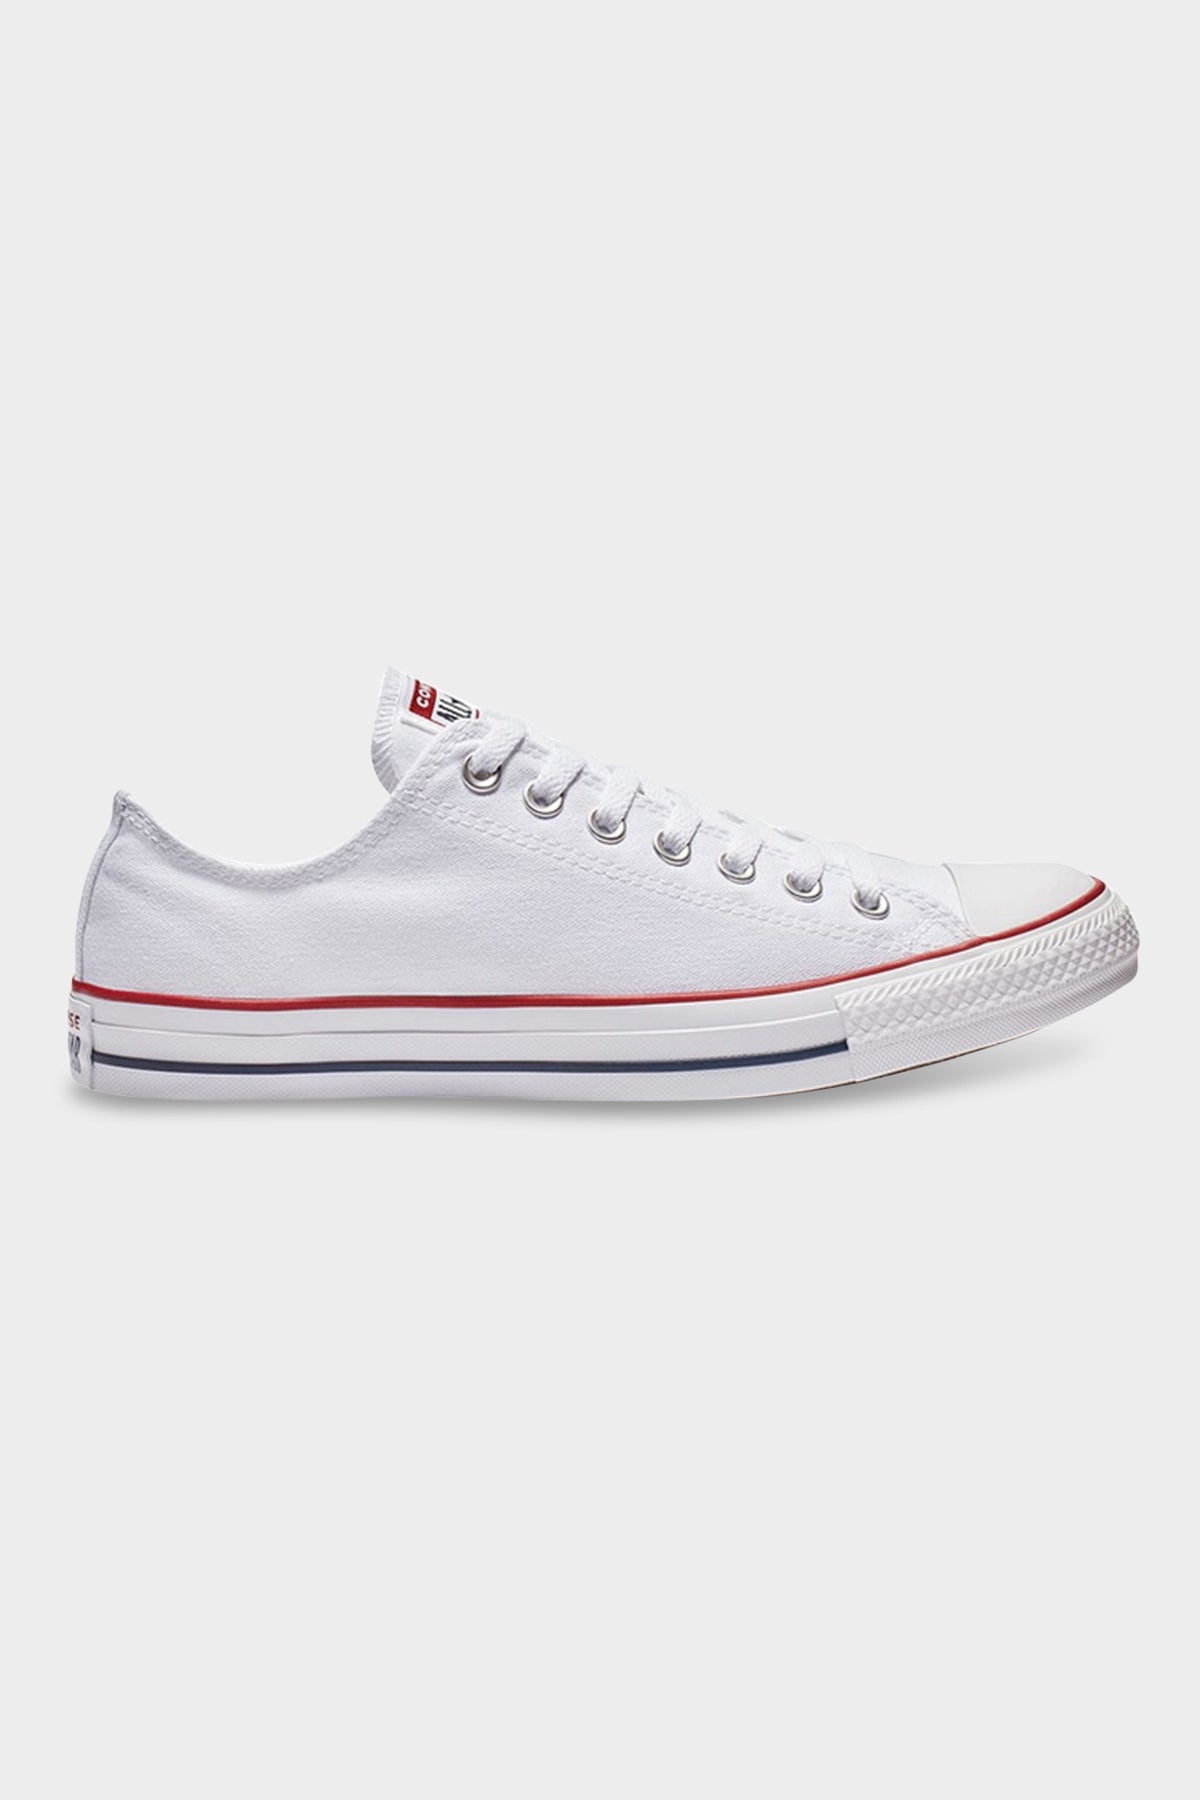 Converse Optical White Low (3989478703207)